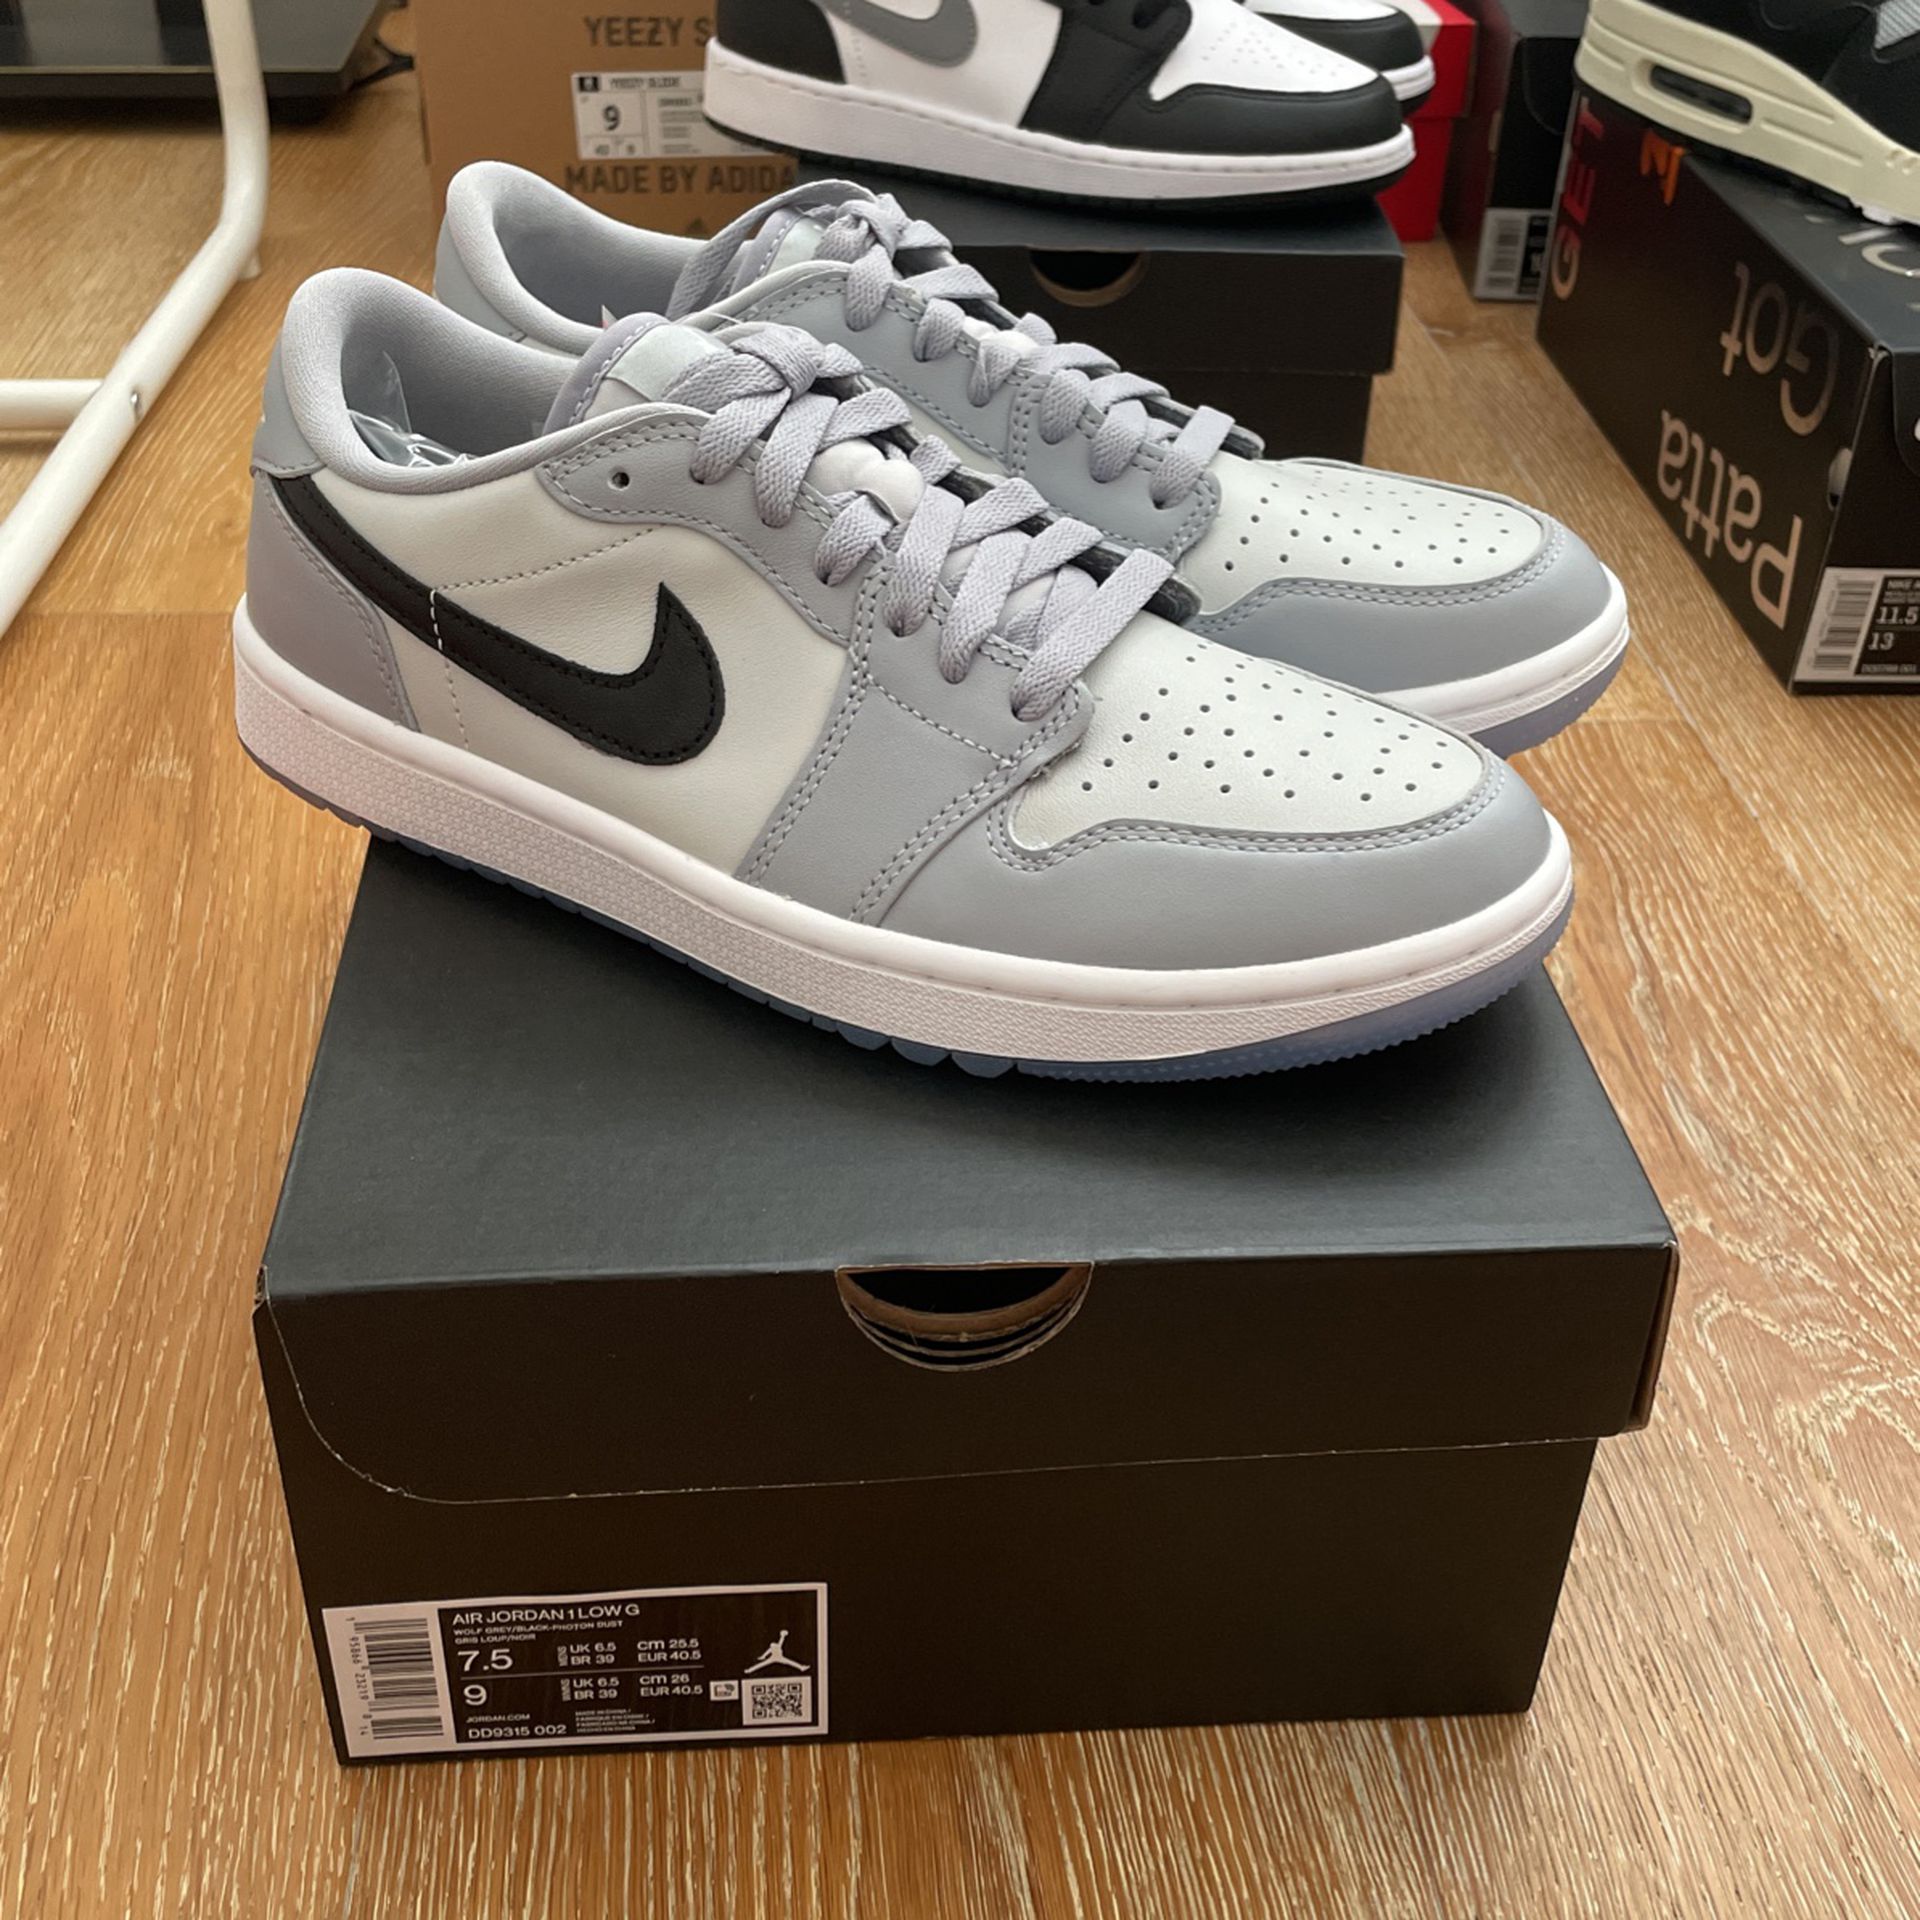 Air Jordan 1 Low Golf Wolf Grey (size 7.5) Brand New Never Tried On for  Sale in Chino, CA - OfferUp